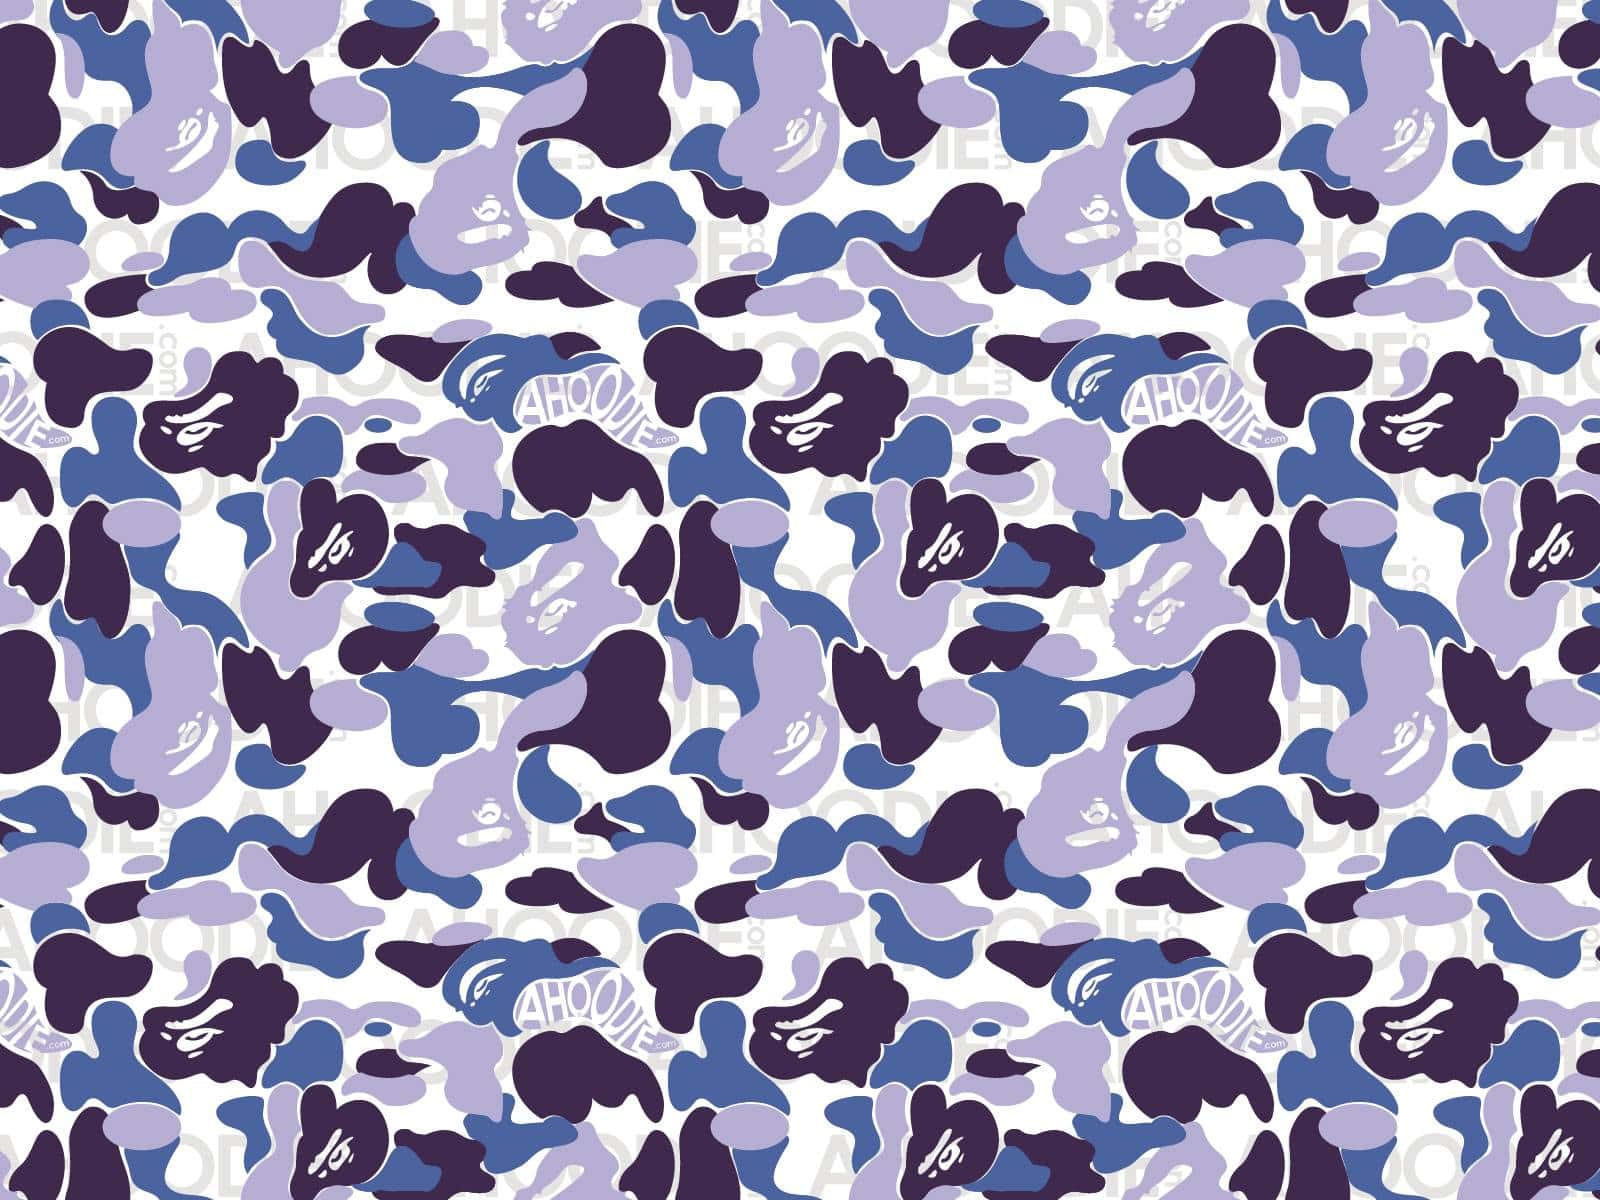 Be unique and stand out from the crowd with Blue Bape Camo Wallpaper